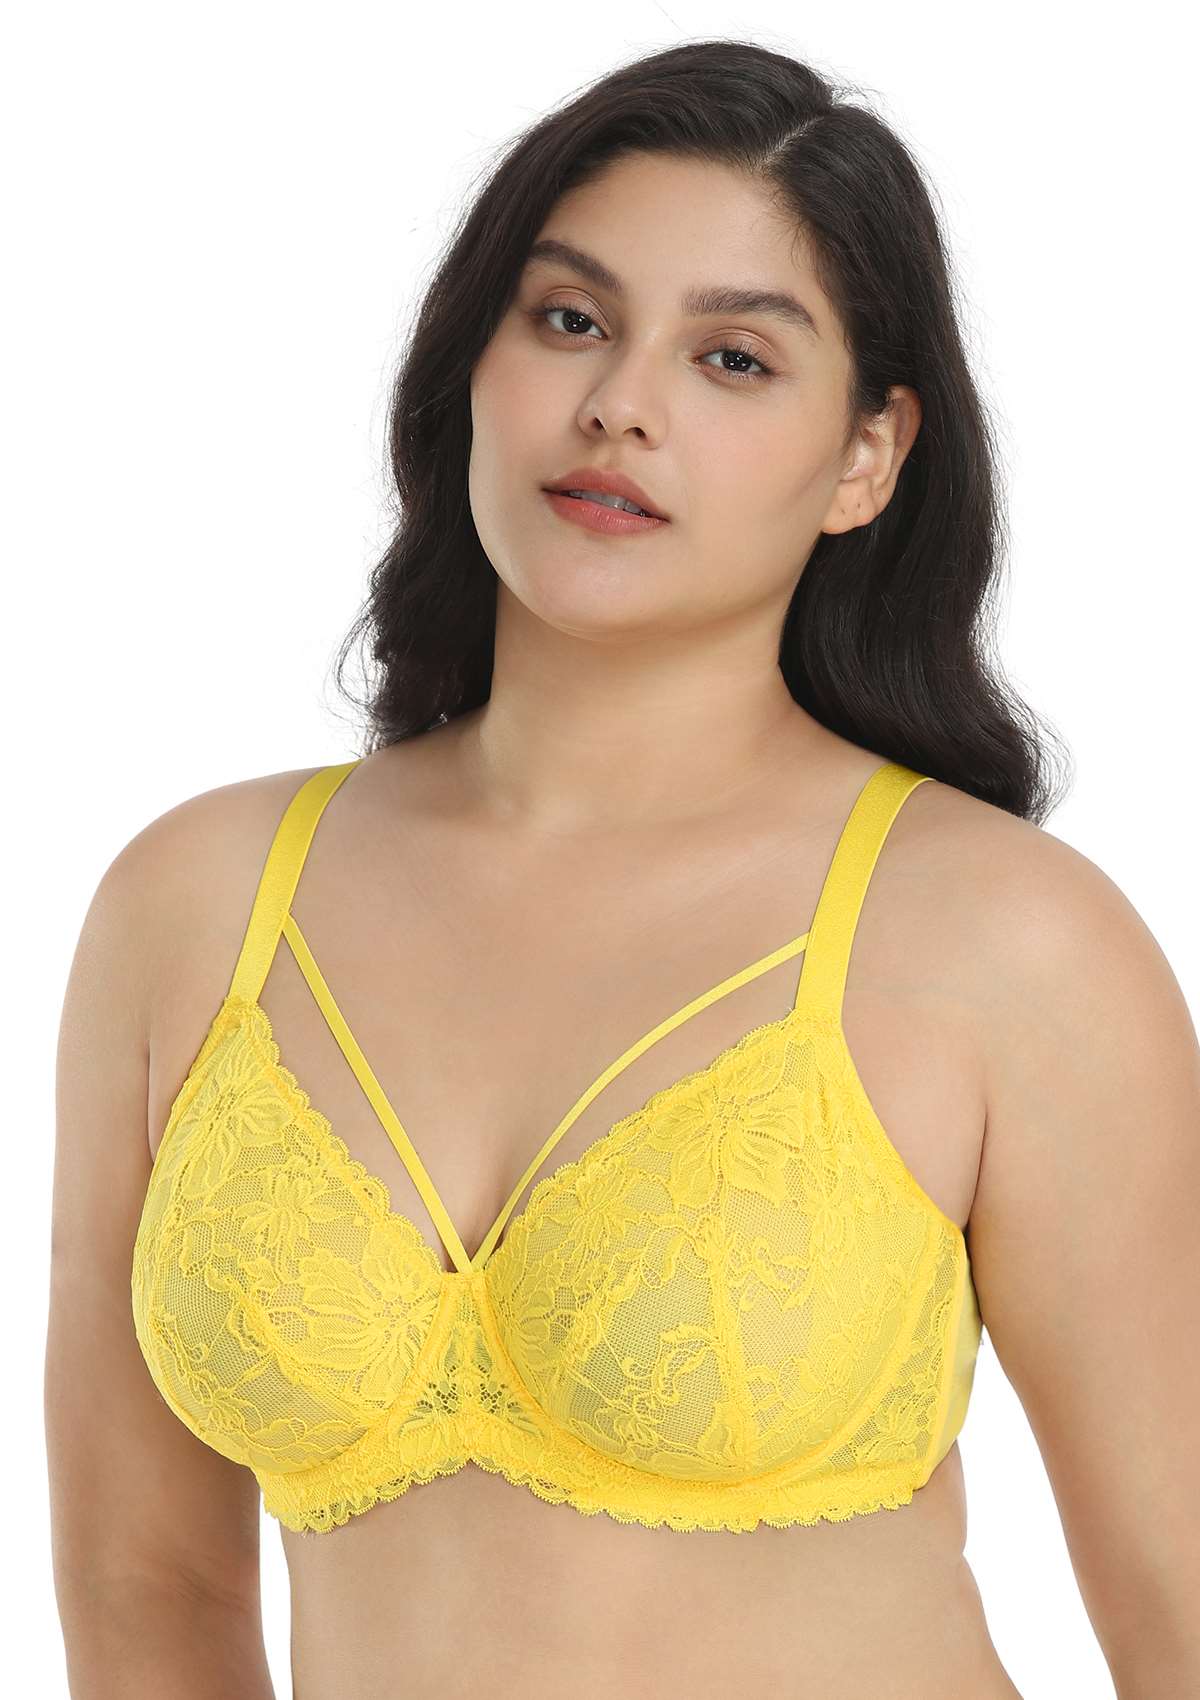 HSIA Unlined Lace Mesh Minimizer Bra For Large Breasts, Full Coverage - Bright Yellow / 46 / C